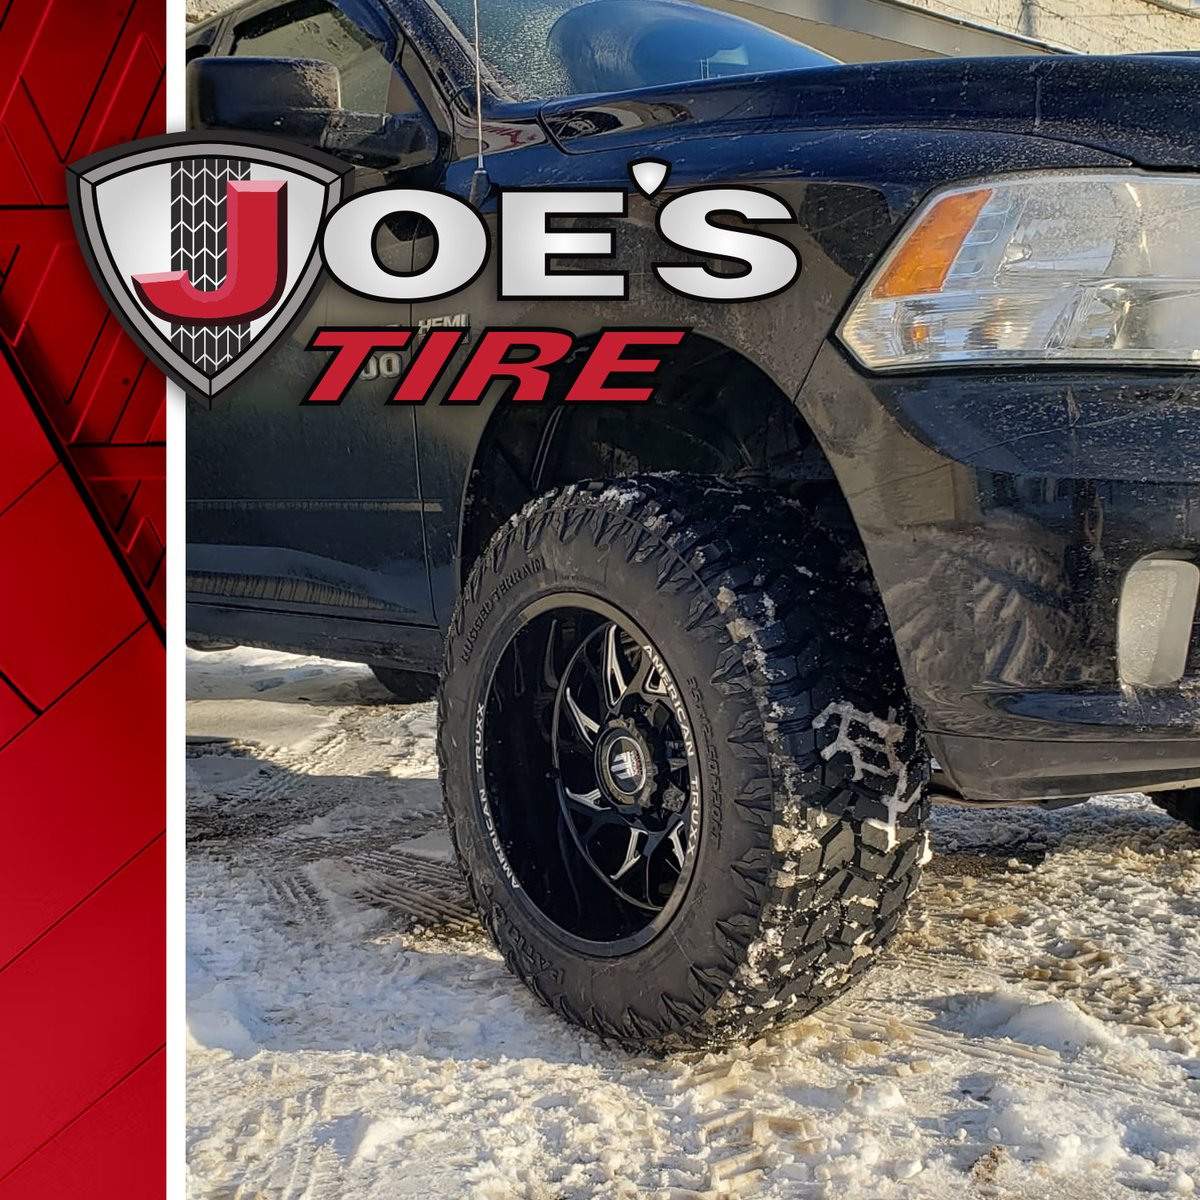 Check out this Ram 1500 dressed in 20x12 American Truxx wrapped in Patriot R/T. 

#tiretuesday
#joestire